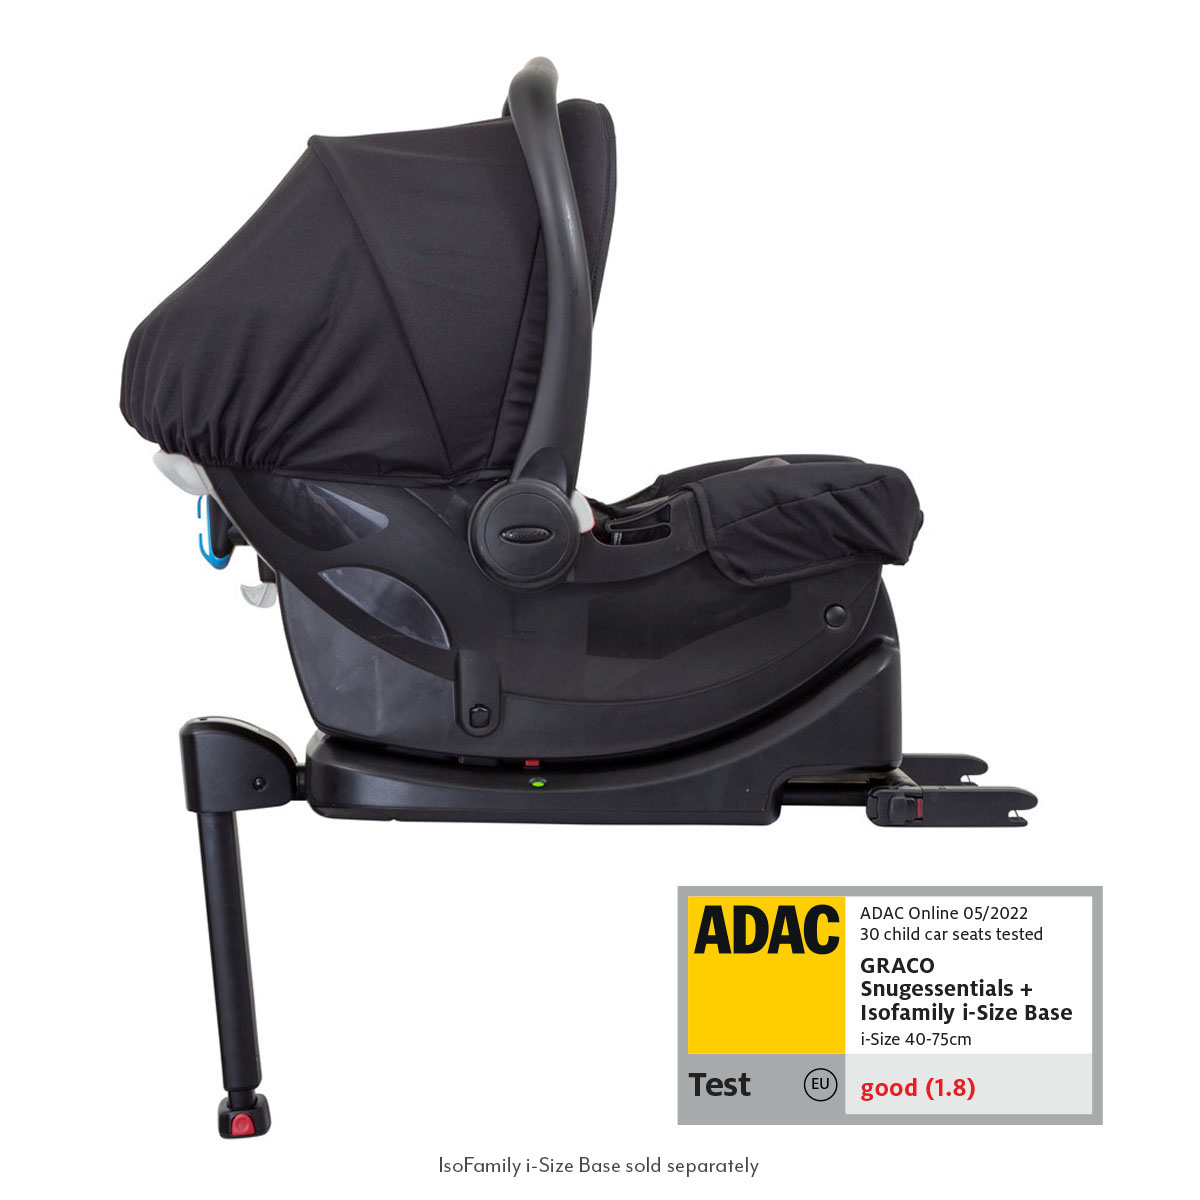 Graco SnugEssentials i-Size infant car seat and SnugRide base with 4-star ADAC score